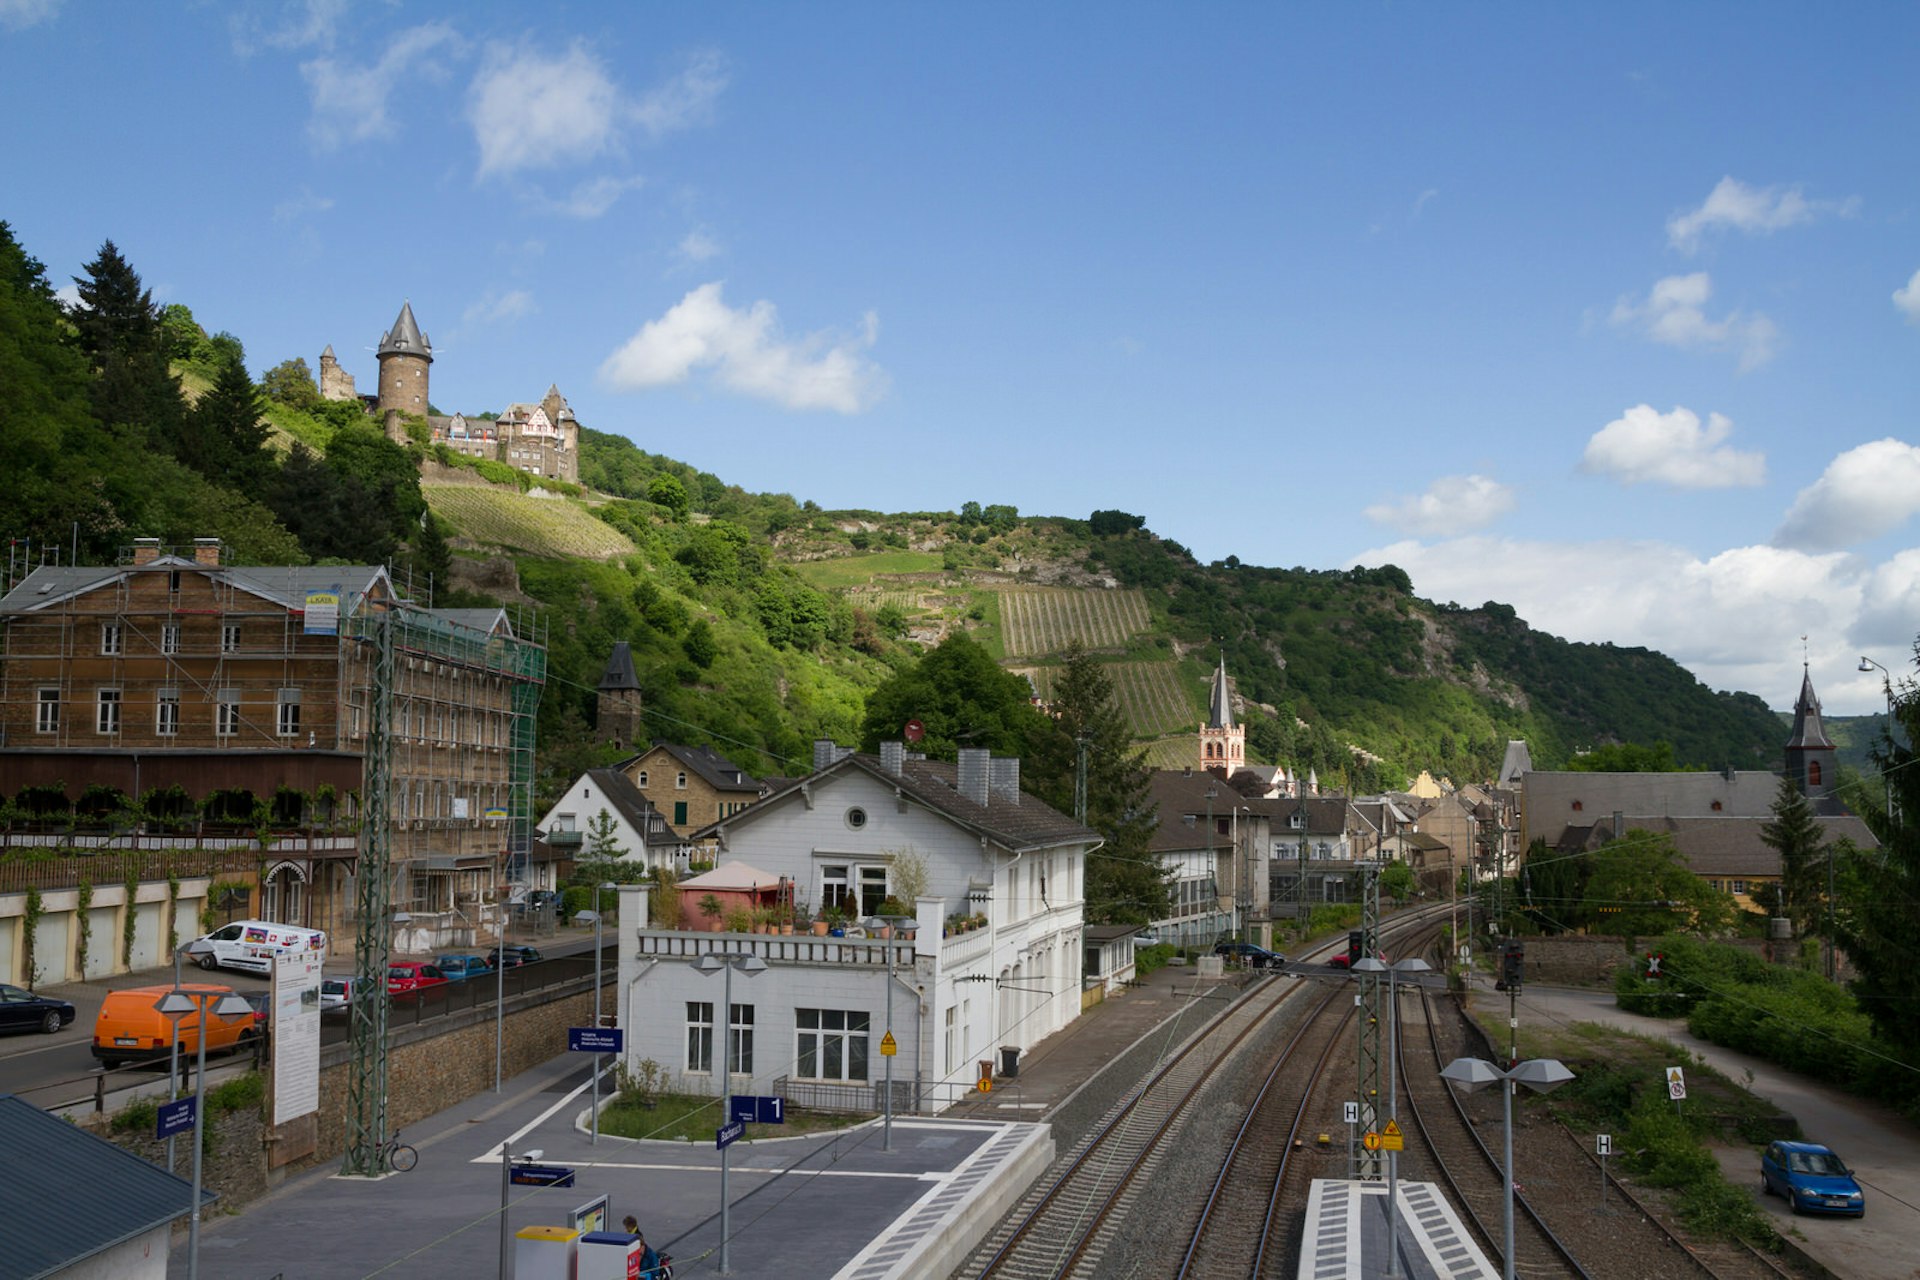 Bacharach Train Station with Castle Stahleck in the background © softdelusion66 / Shutterstock